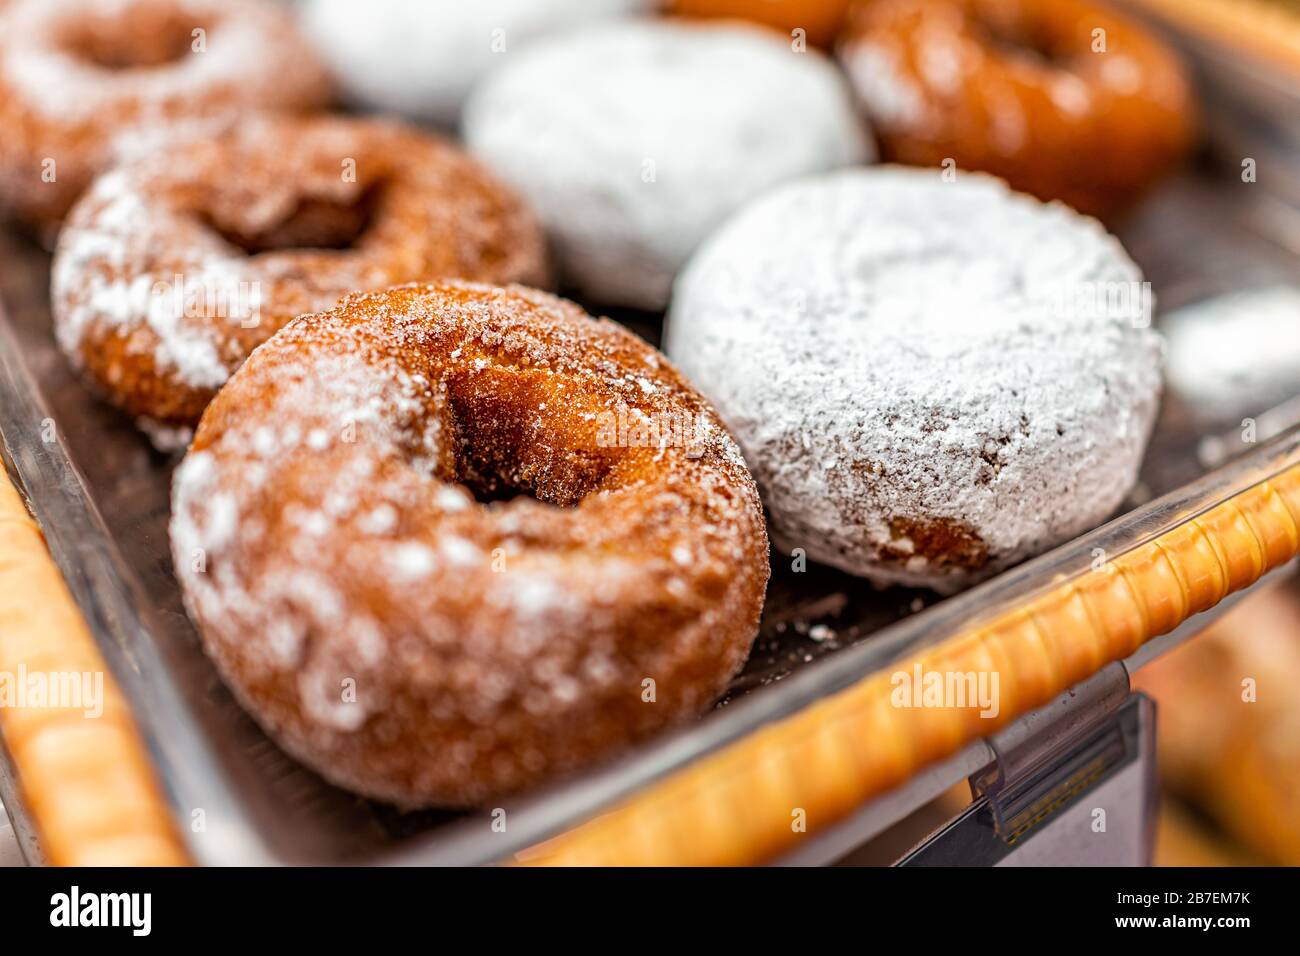 Brown plain cinnamon donuts and white powdered sugar closeup on bakery tray deep fried flavor with holes Stock Photo